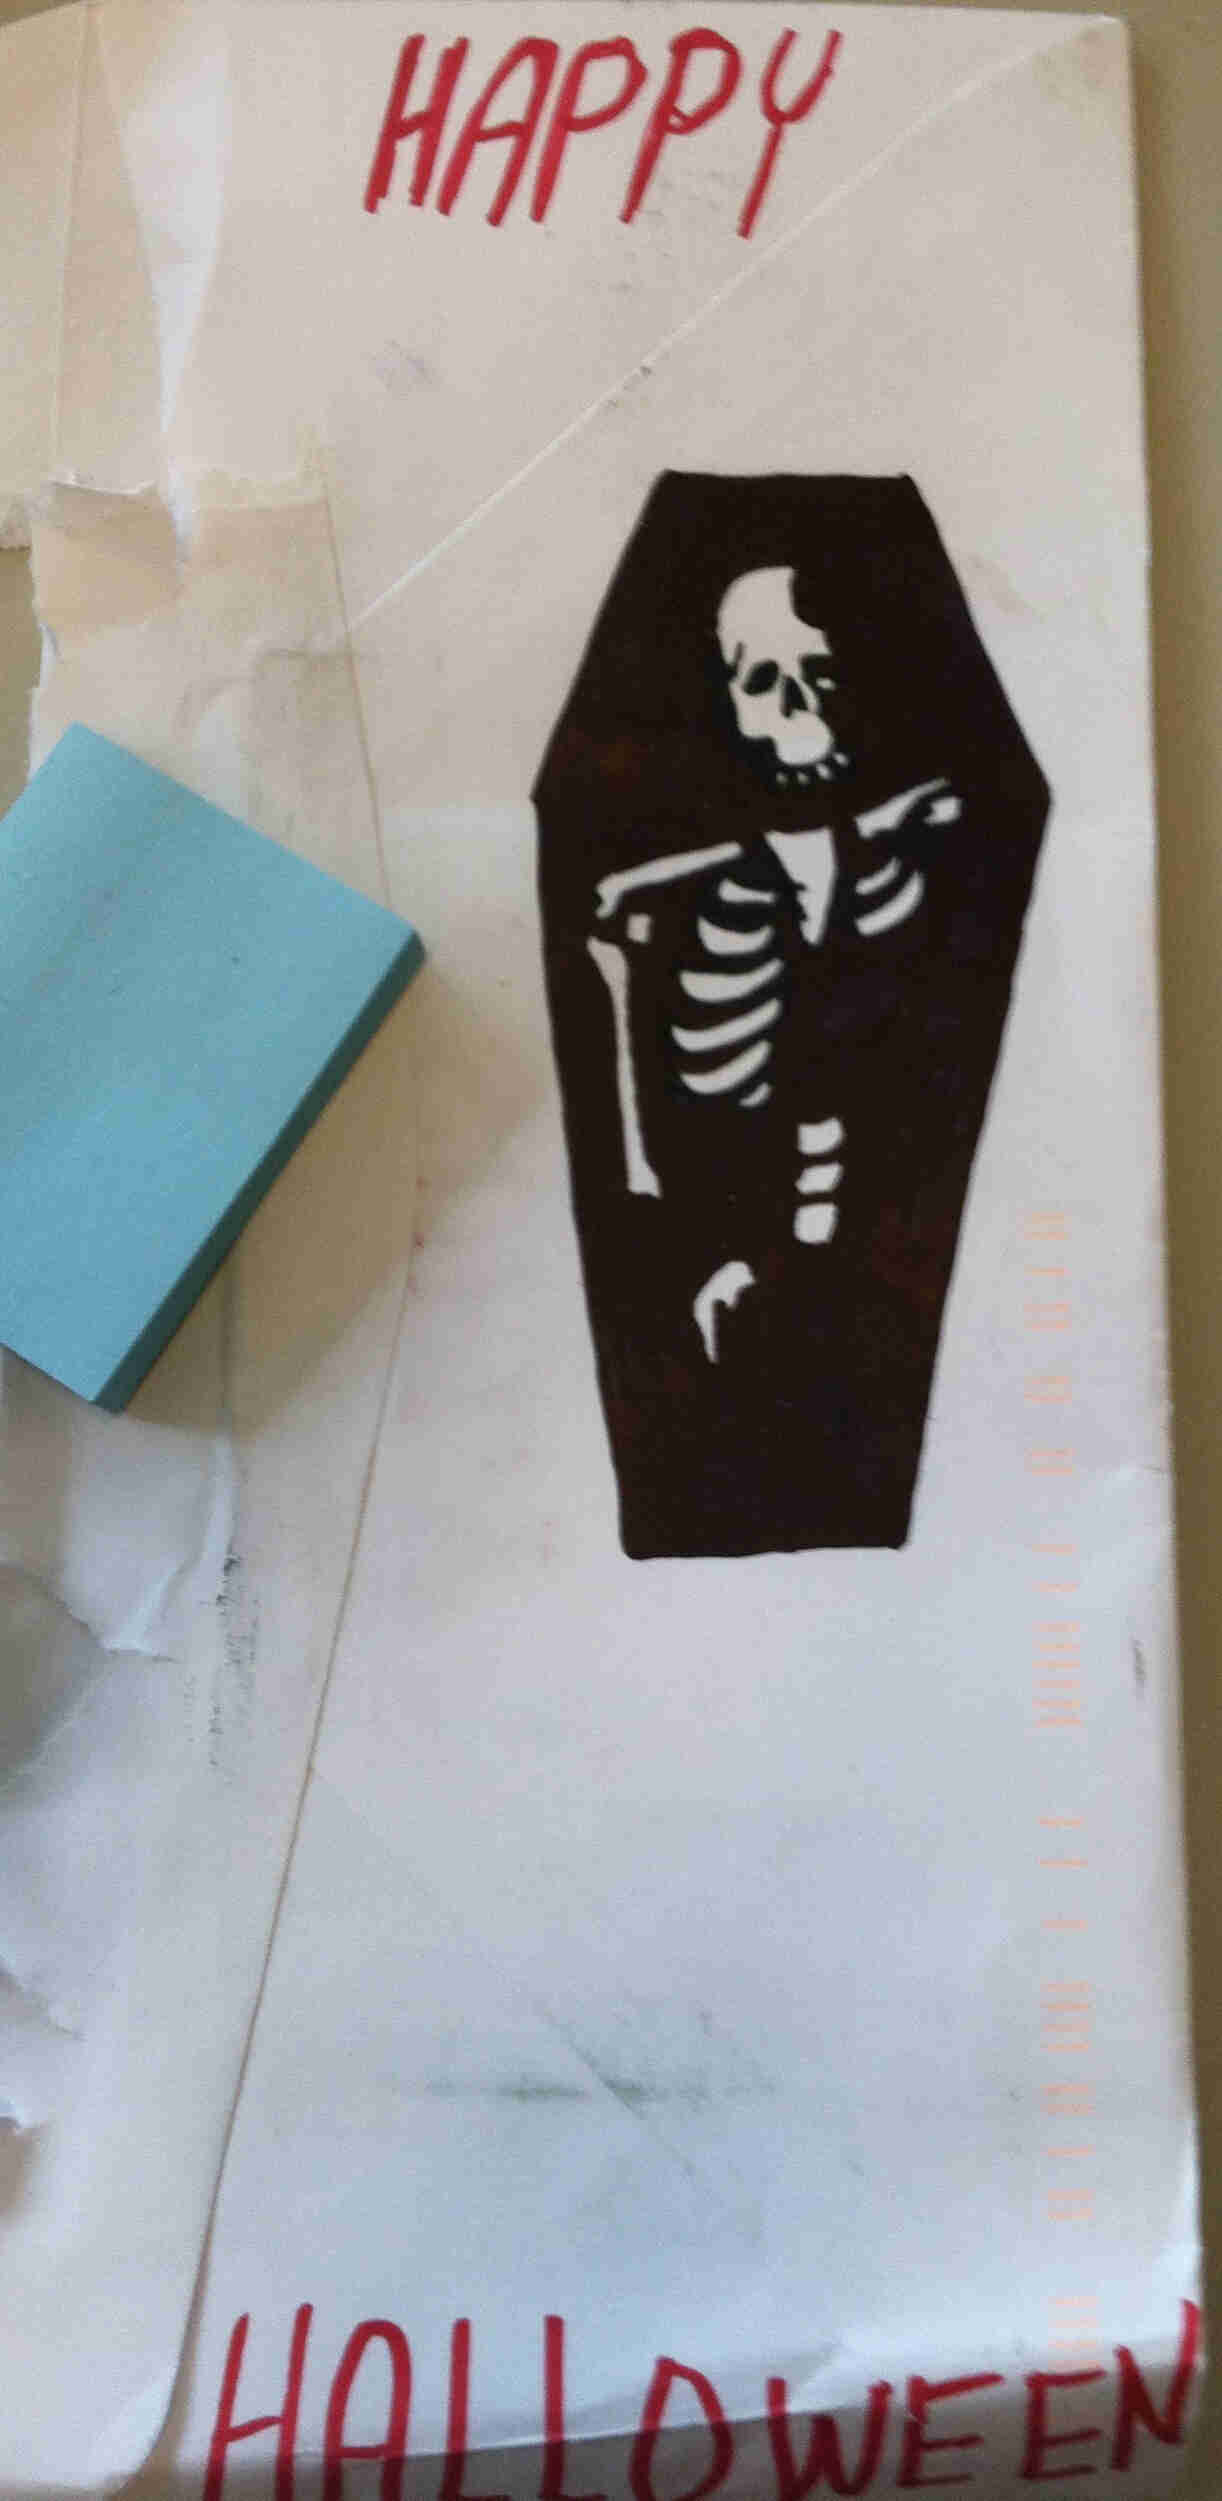 Downward, view of the back of a white envelope, with Happy Halloween, written in red marker, and a coffin drawing on it